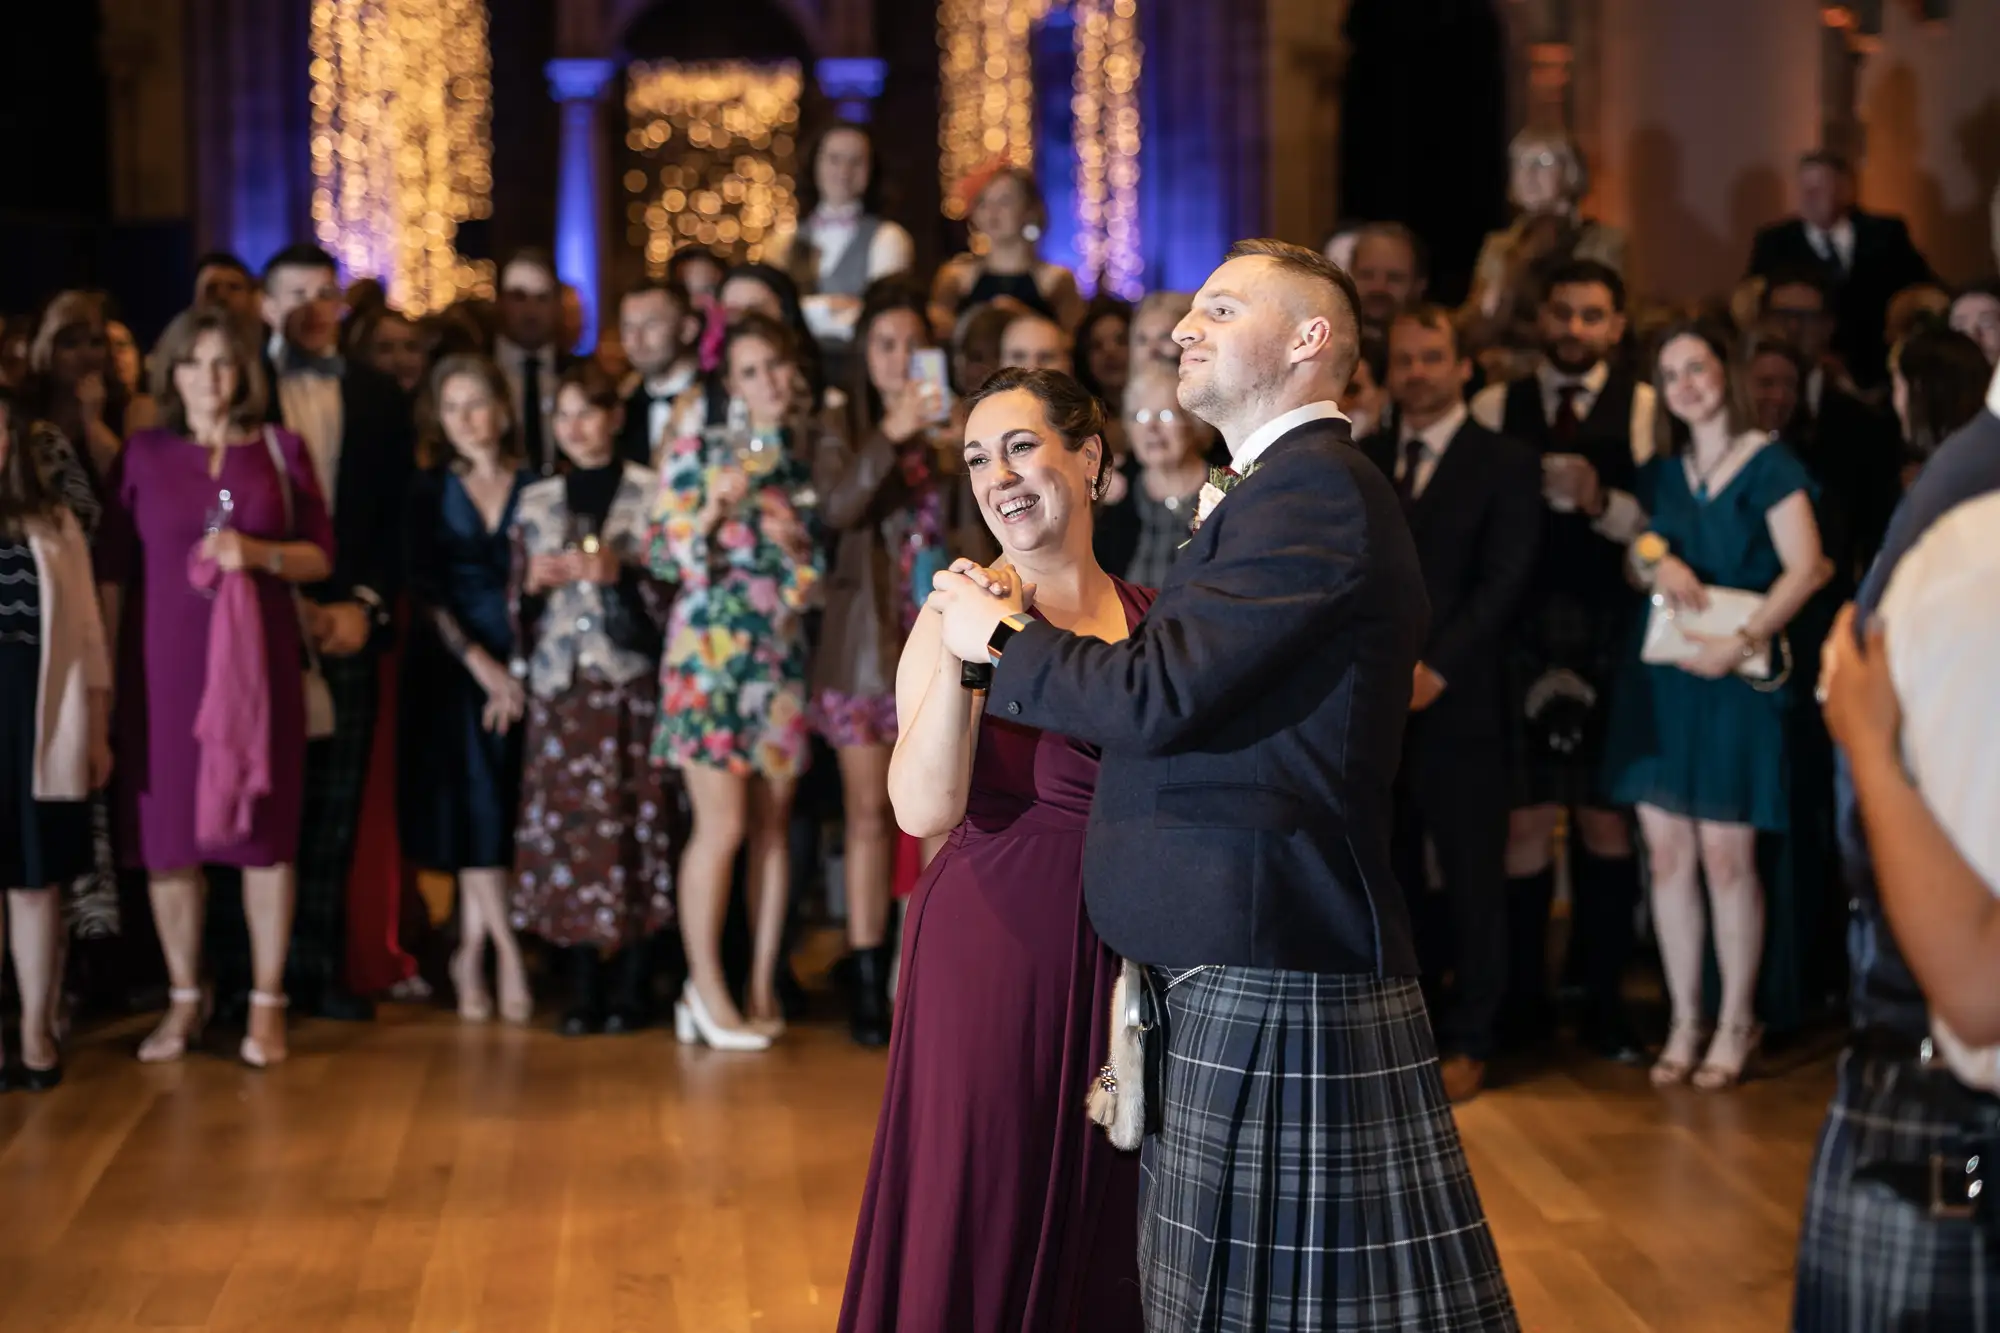 A couple joyfully dances in front of a crowd at a formal event, the man wearing a kilt and the woman in a burgundy dress.